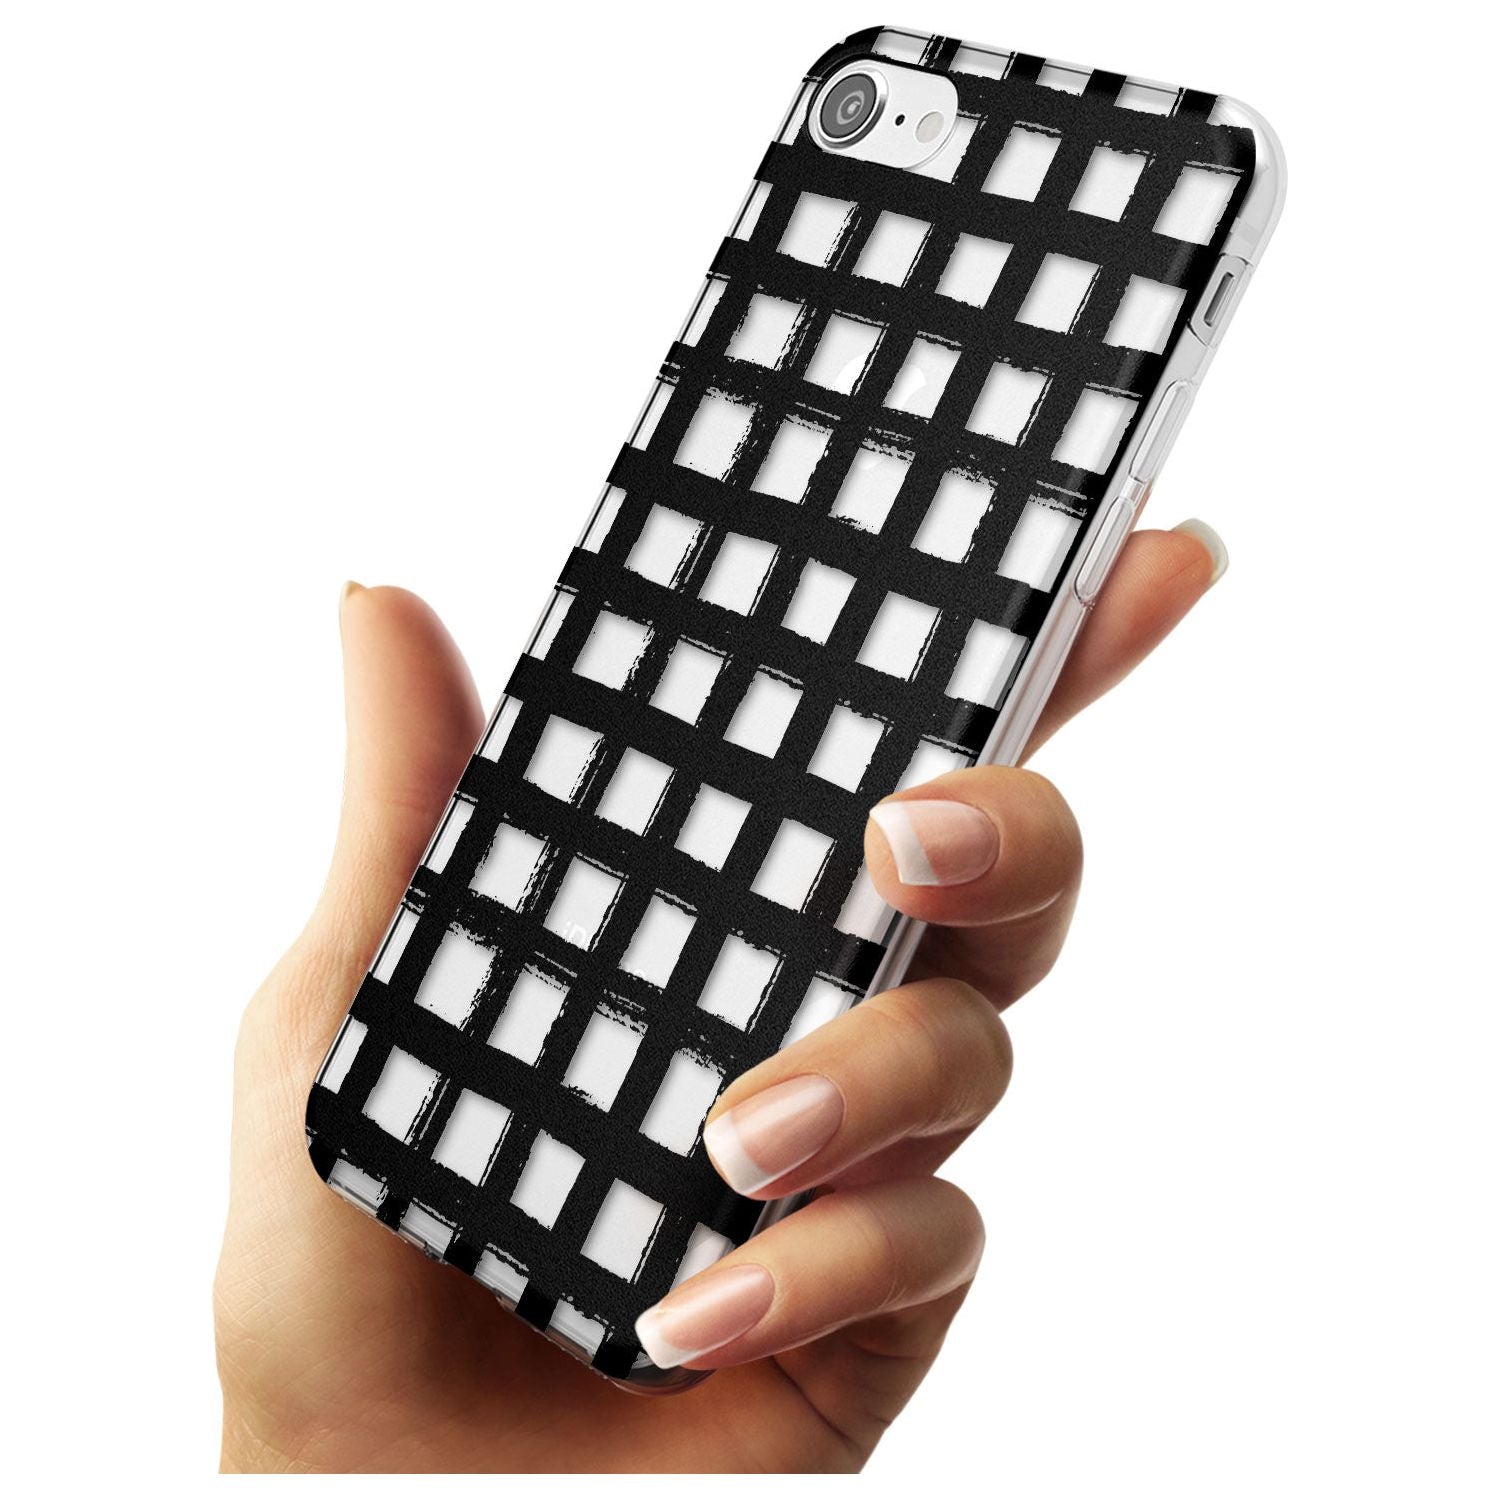 Messy Black Grid - Clear Black Impact Phone Case for iPhone SE 8 7 Plus